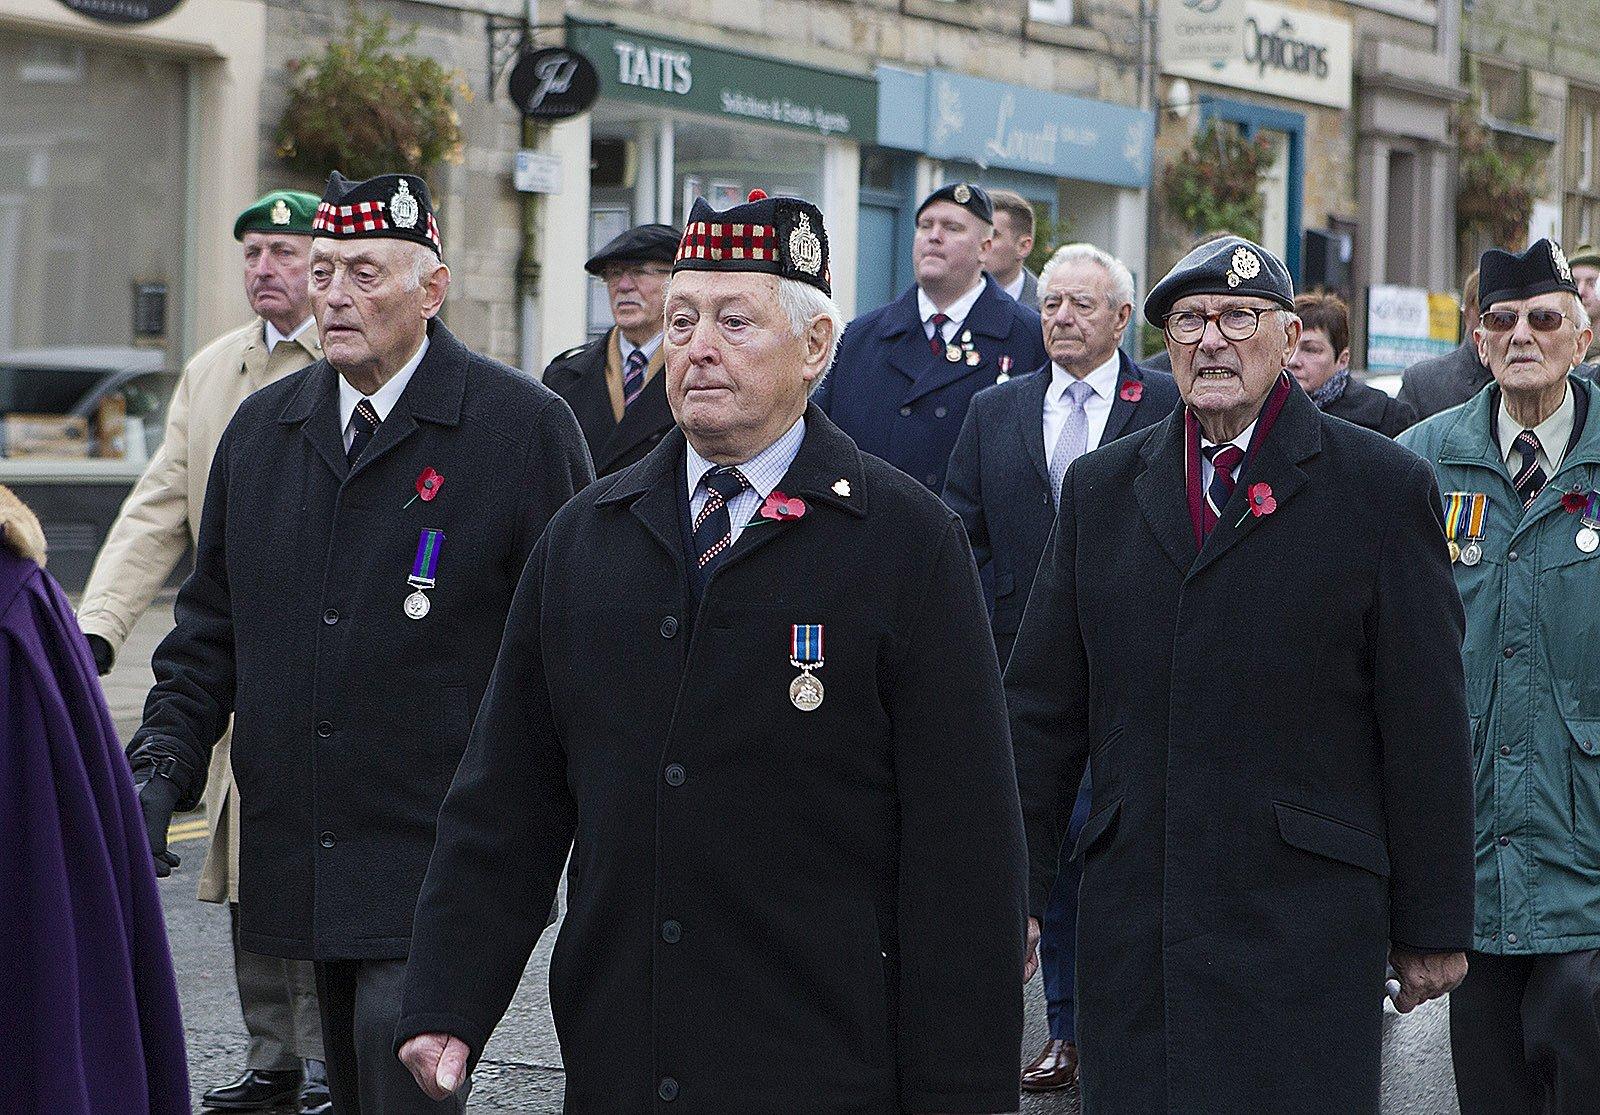 Charlie Murdock, Gary Scott and George Patterson in the remembrance parade in Jedburgh.